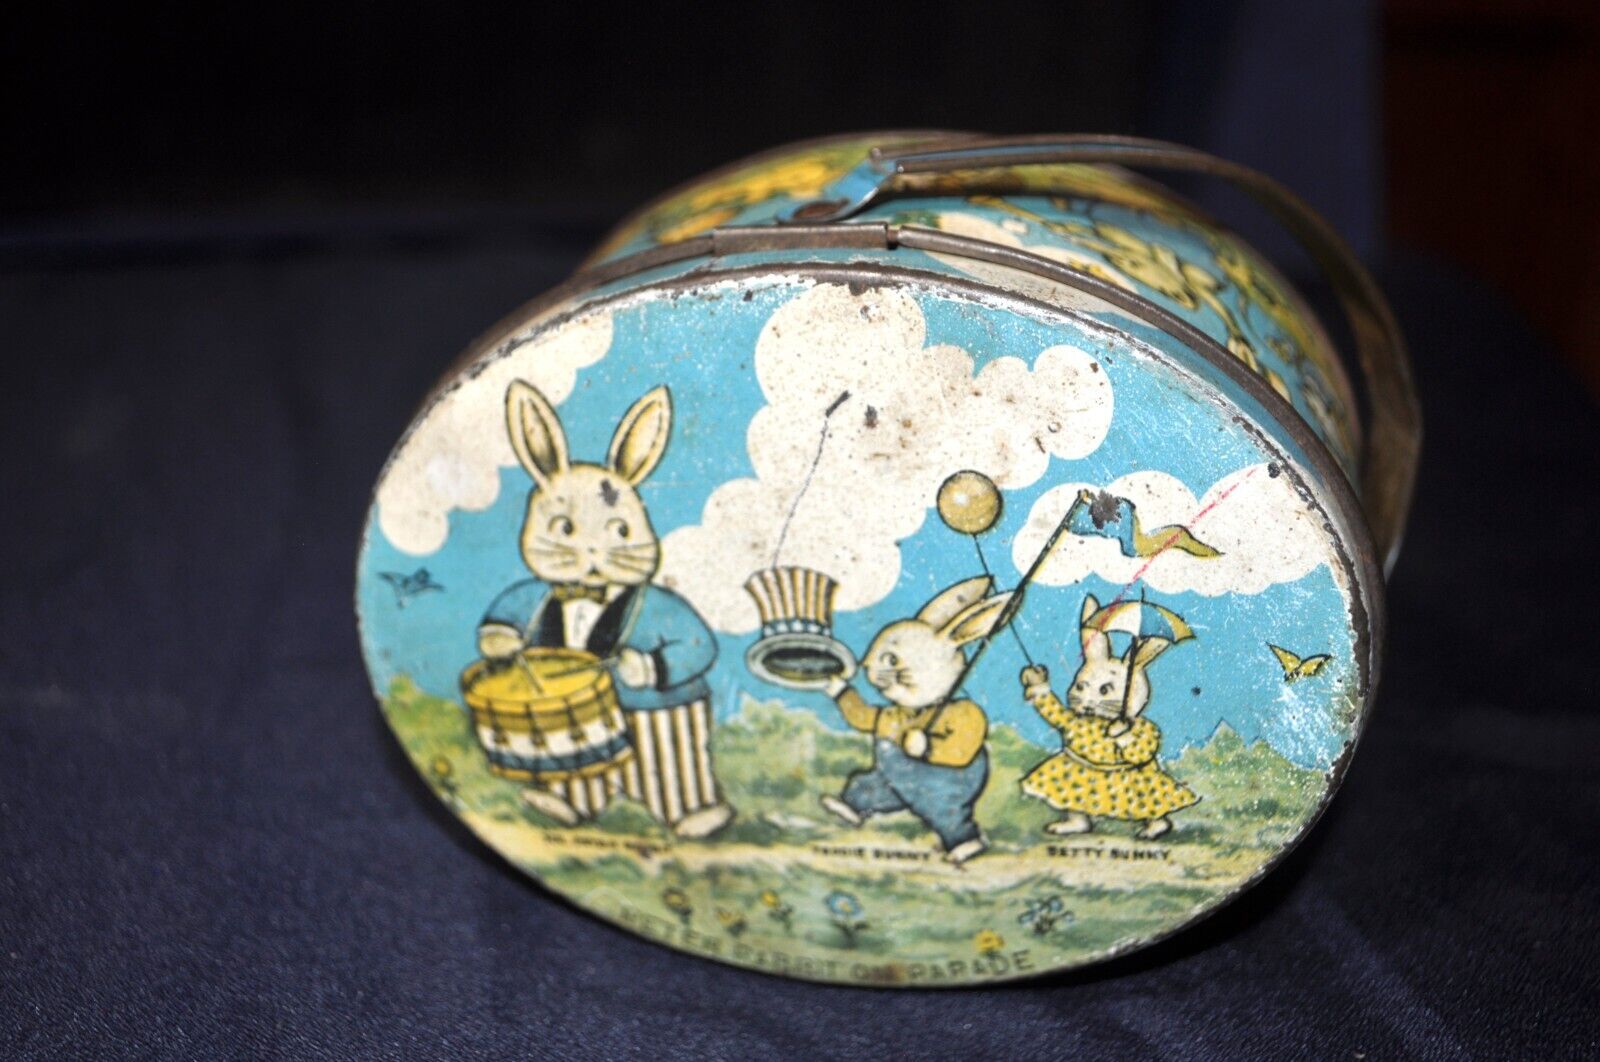 ANTIQUE 1930 VTG TINDECO EASTER TIN LITHO CANDY CONTAINER Patriotic Peter Rabbit